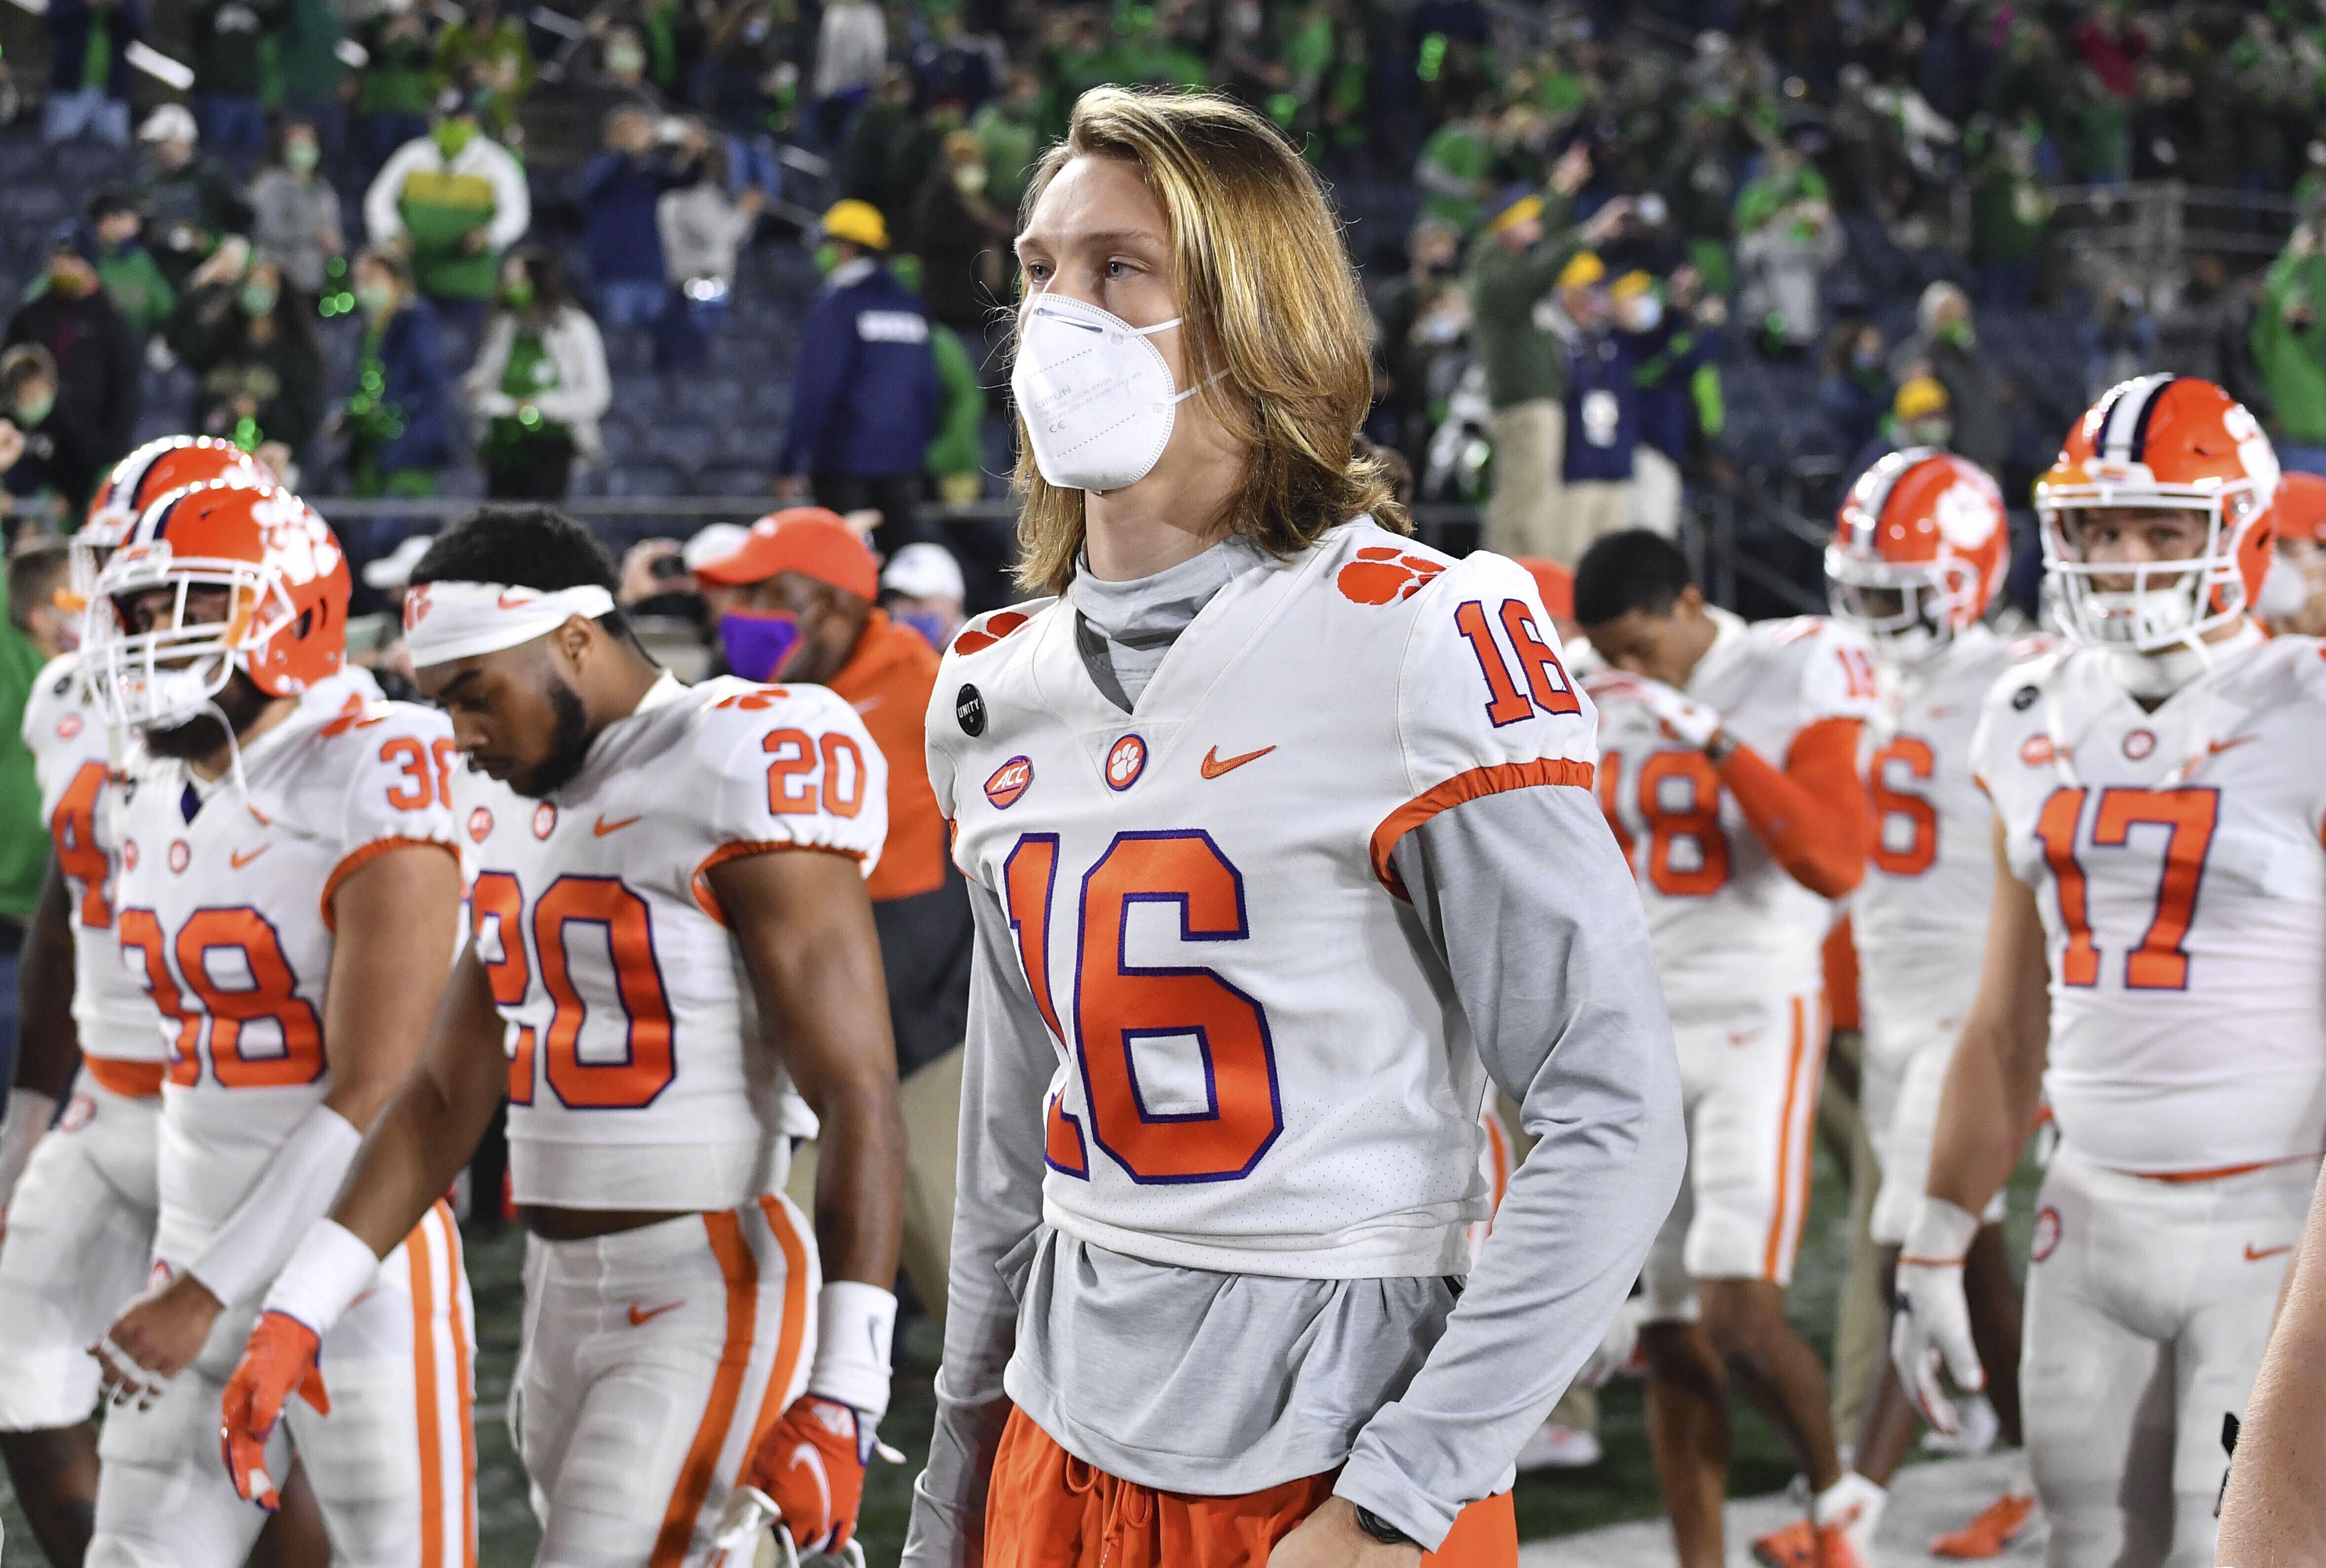 2021 NFL Mock Draft: Trevor Lawrence heads to the Jets at No. 1 overall,  Justin Fields lands in Washington at Pick No. 3, NFL Draft